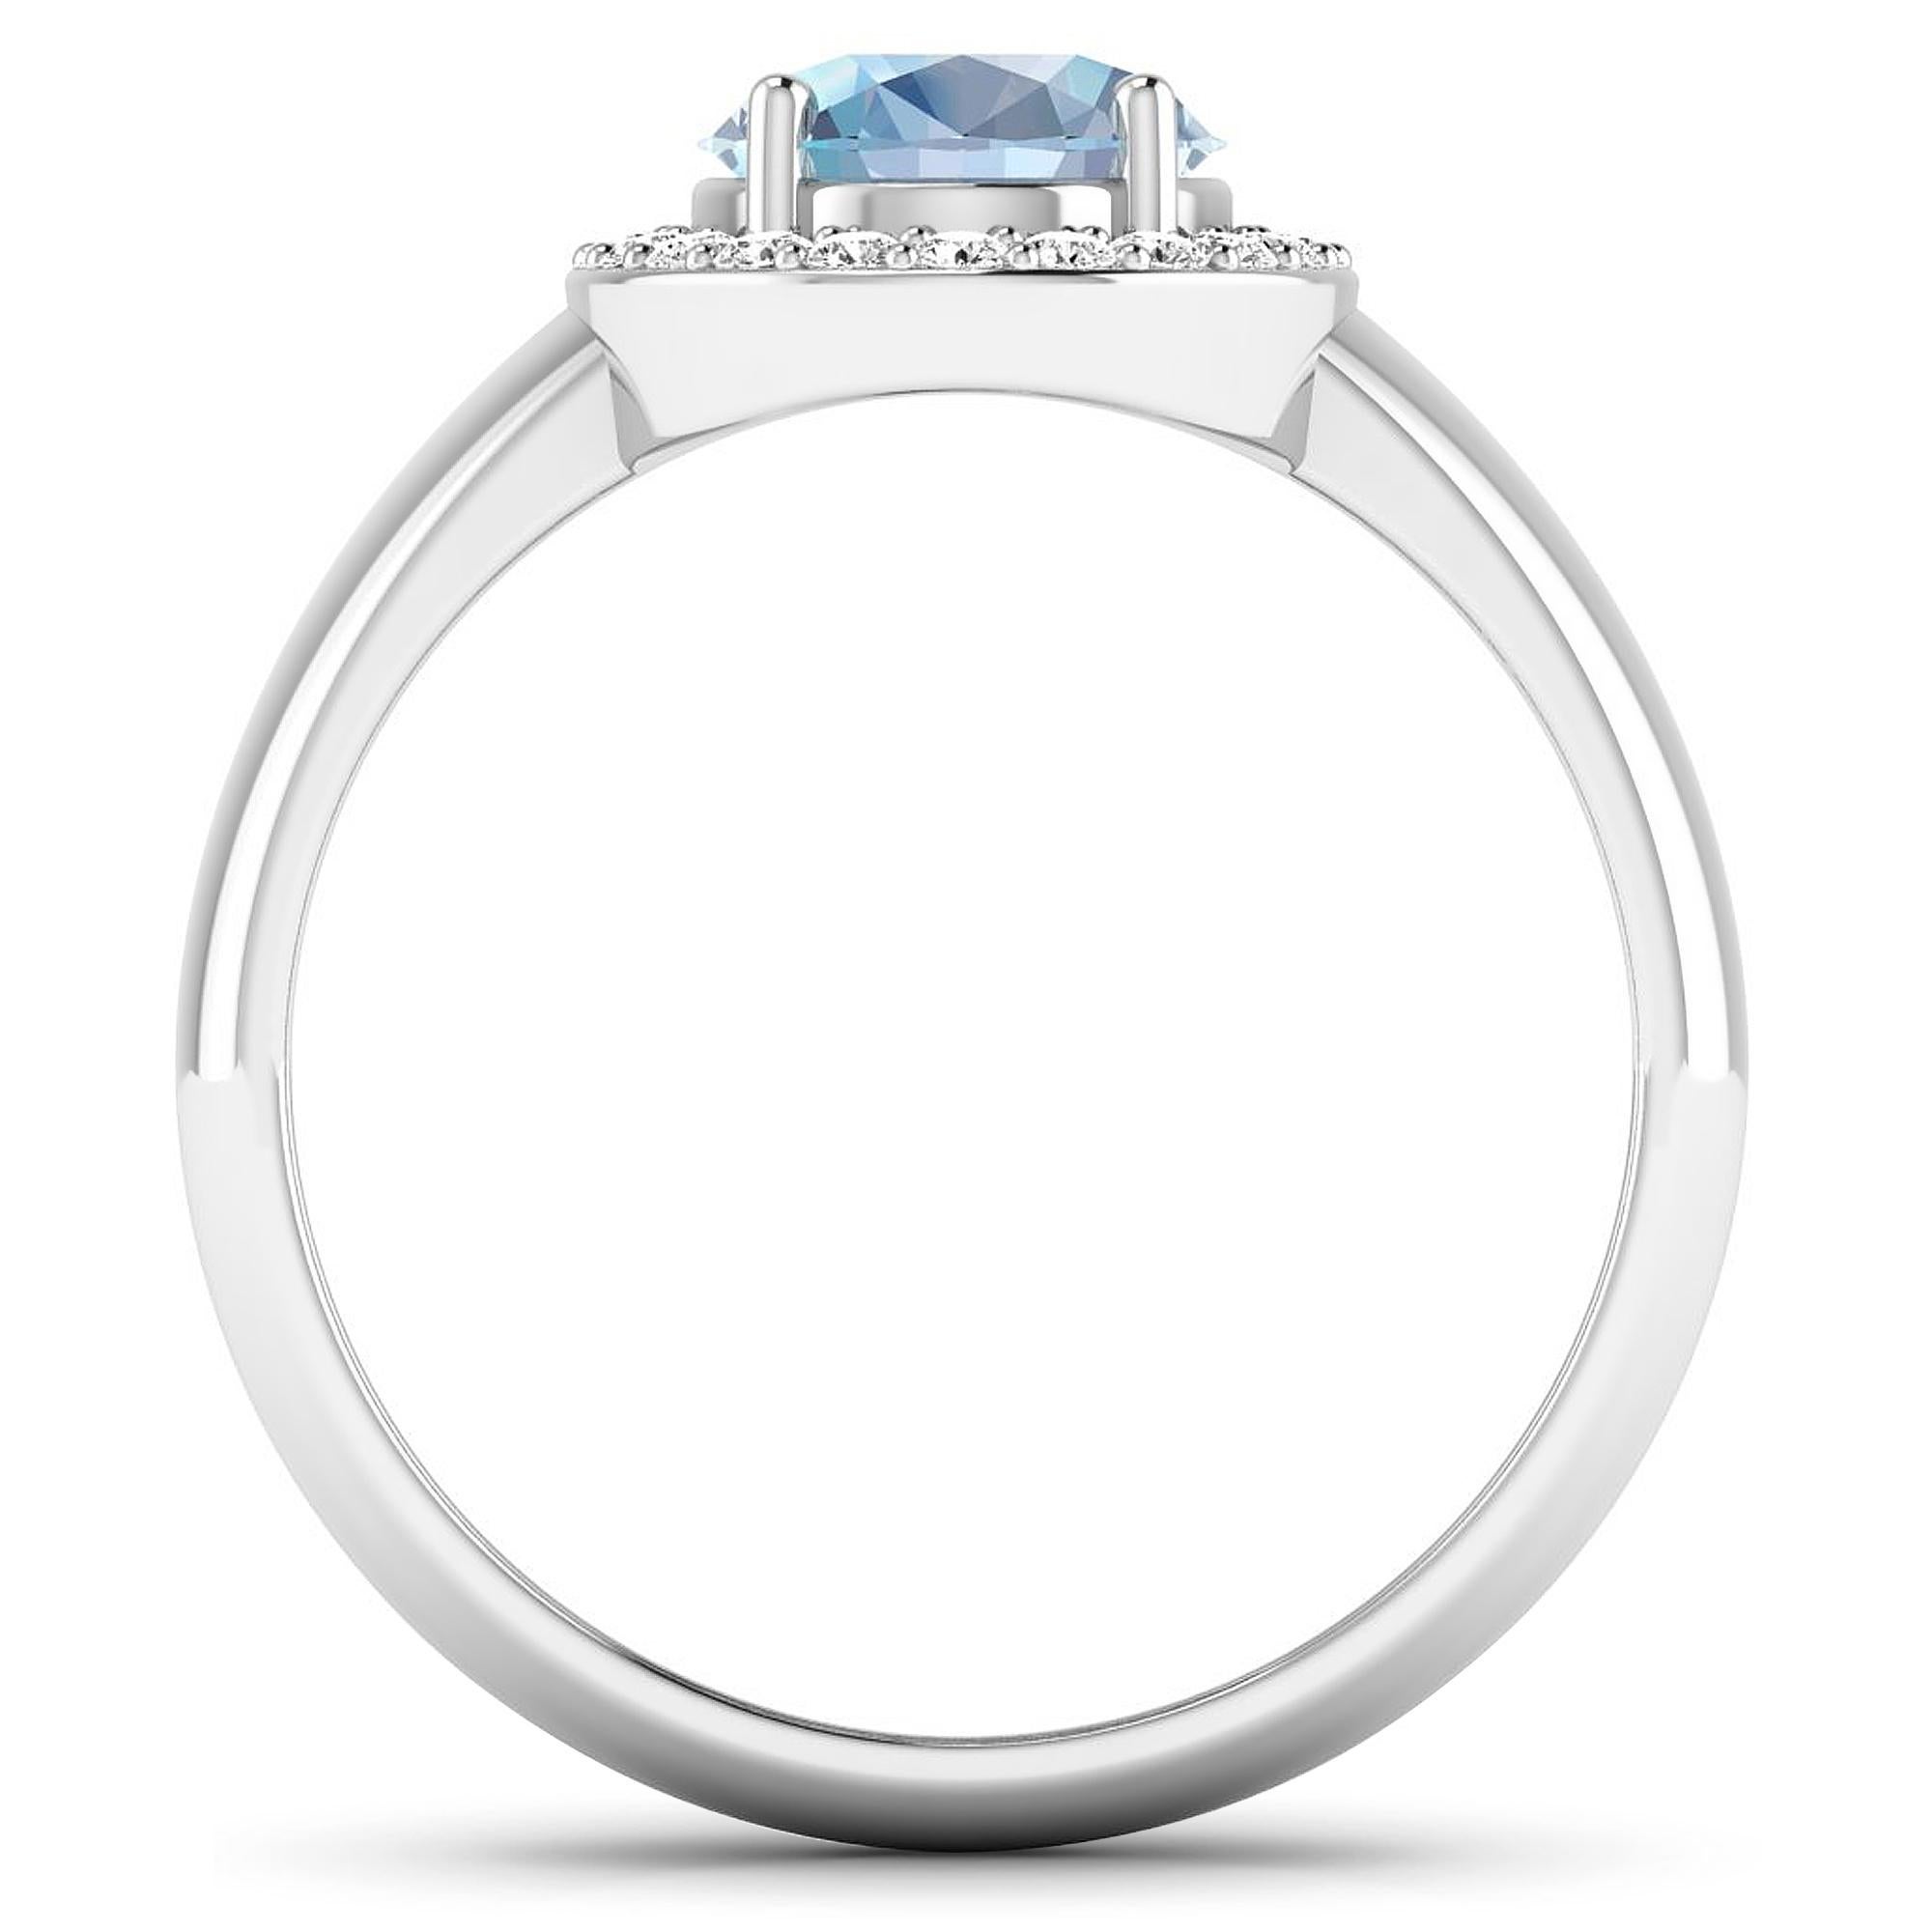 Aquamarine Gold Ring, 14Kt Gold Aquamarine & Diamond Engagement Ring, 1.62ctw.

Flaunt yourself with this 14K White Gold Aquamarine & White Diamond Engagement Ring. The setting is inlaid with 22 accented full-cut White Diamond round stones for a